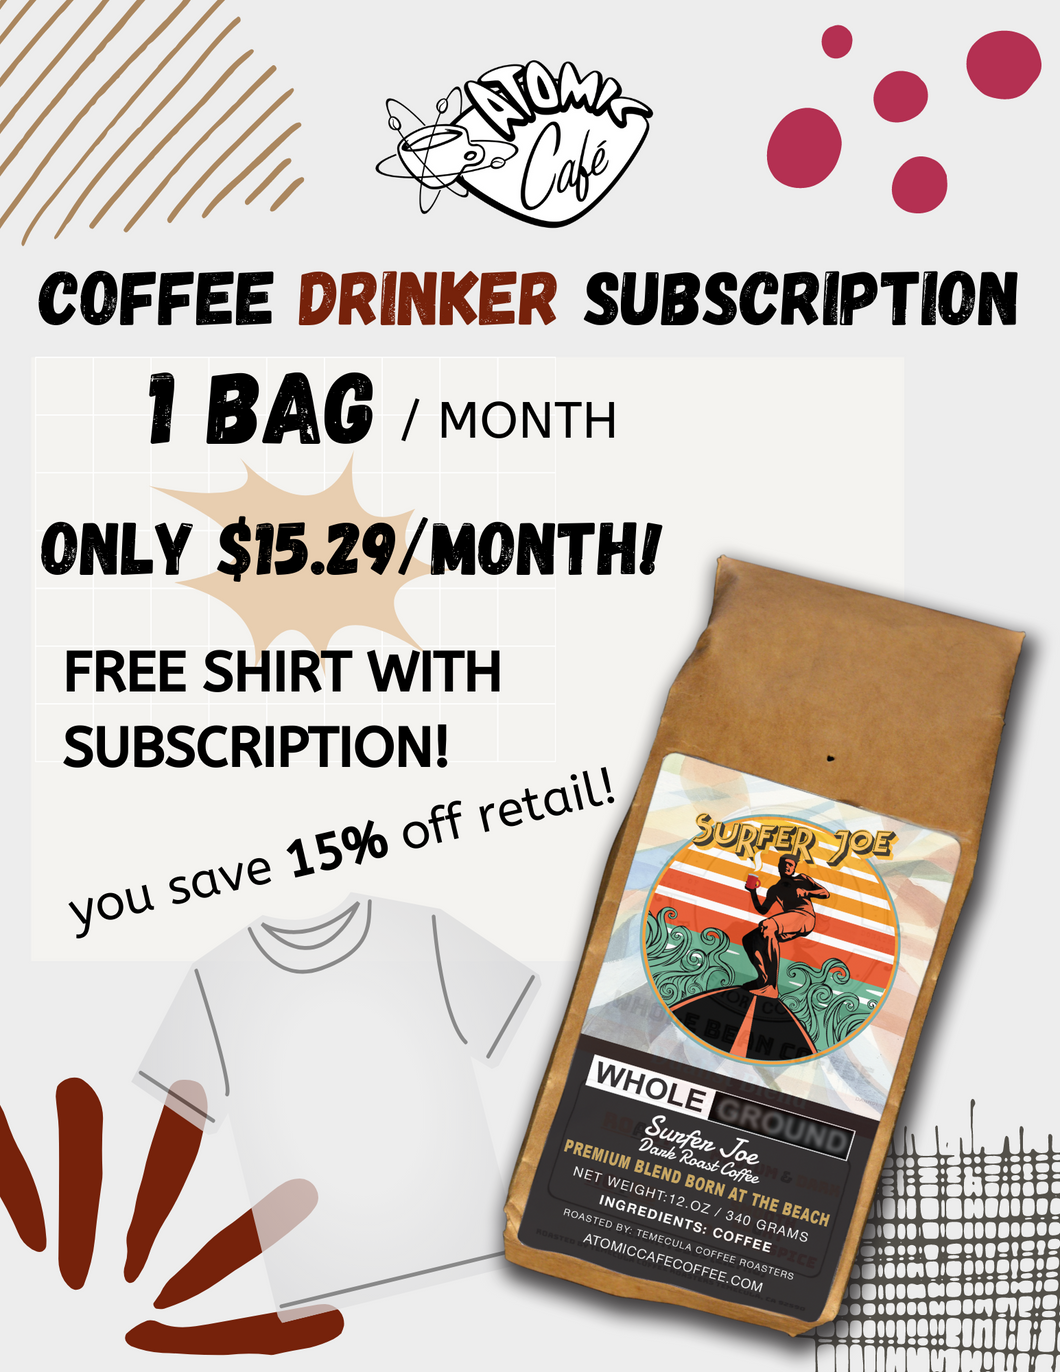 COFFEE DRINKER SUBSCRIPTION - 1 bag / month